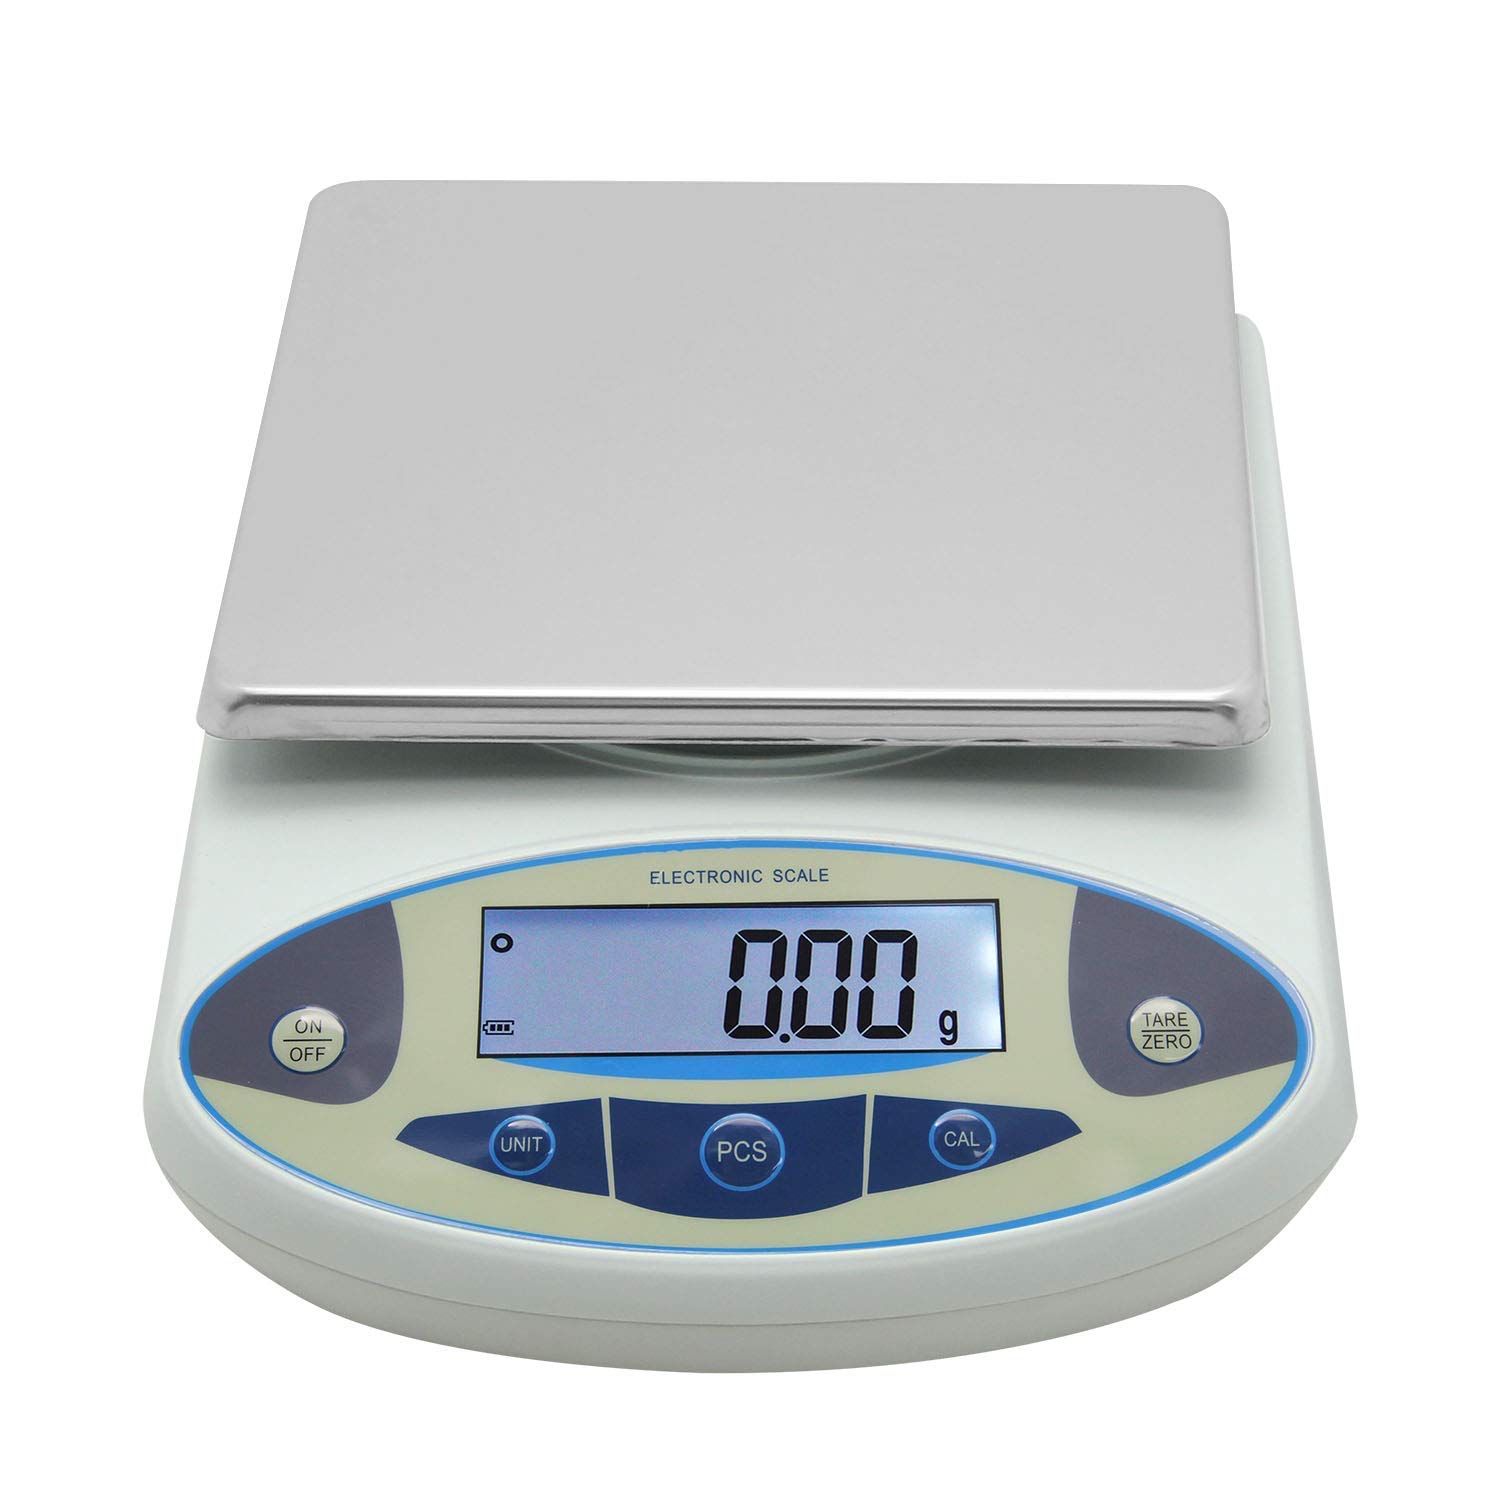 Scales or balance scale